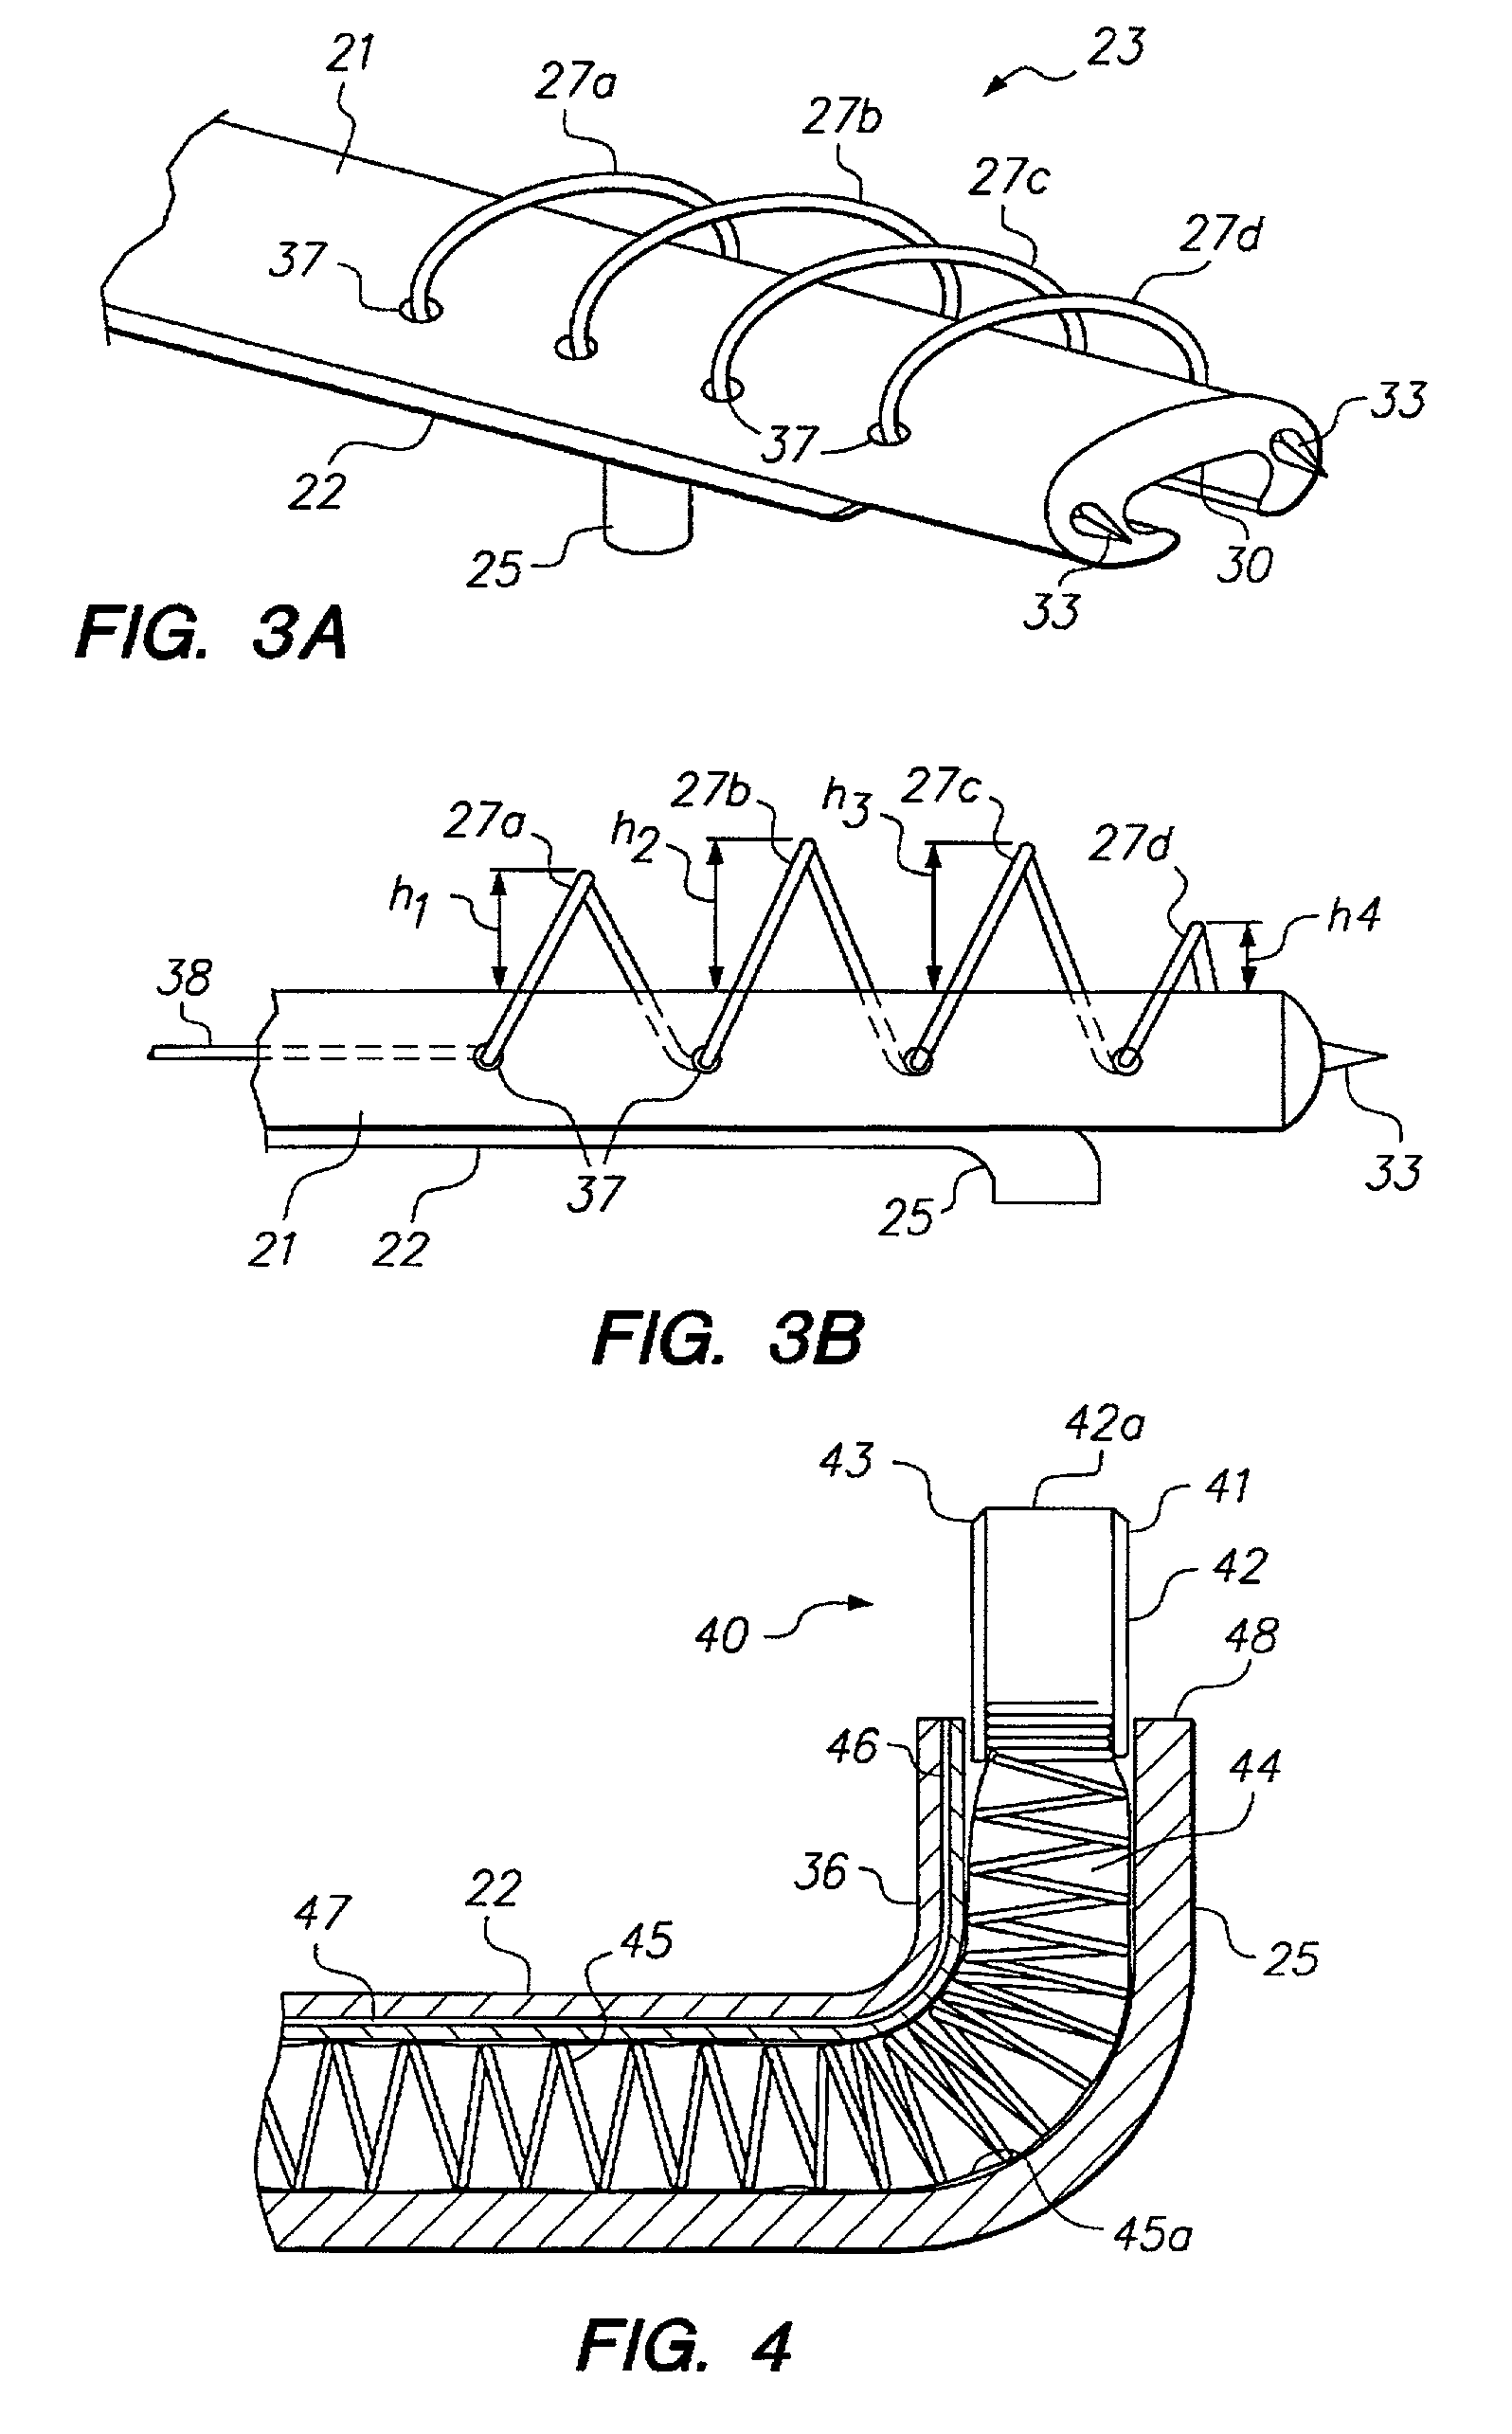 Apparatus having stabilization members for percutaneously performing surgery and methods of use